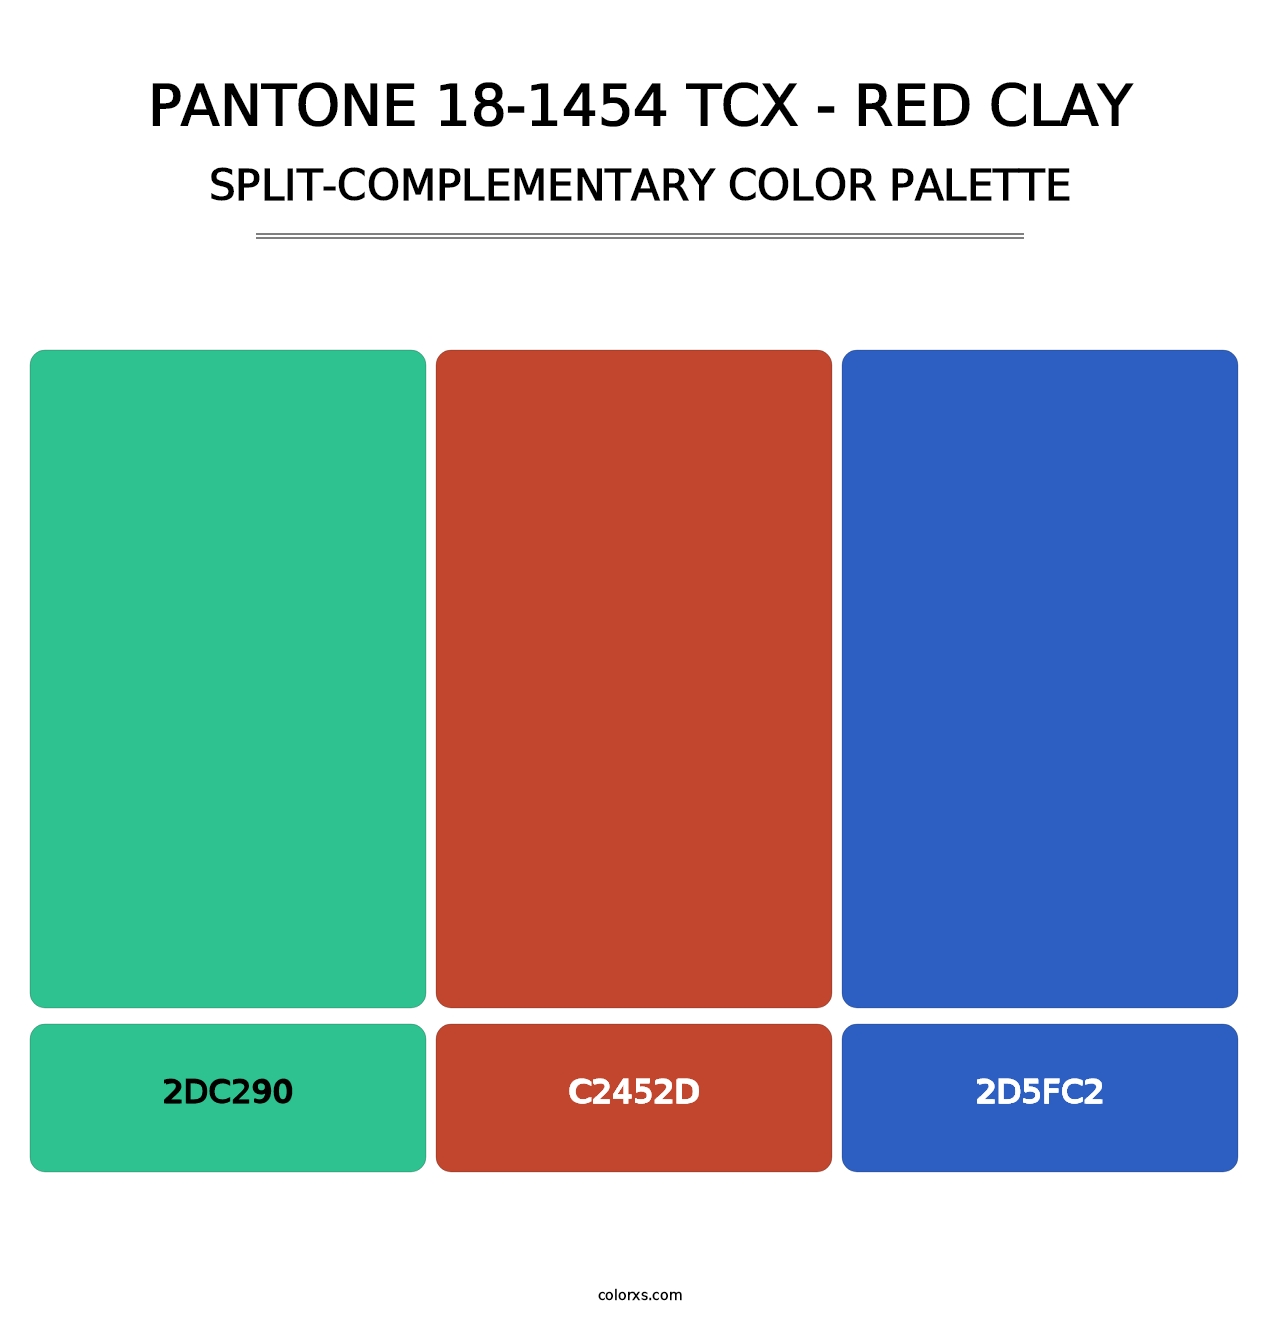 PANTONE 18-1454 TCX - Red Clay - Split-Complementary Color Palette